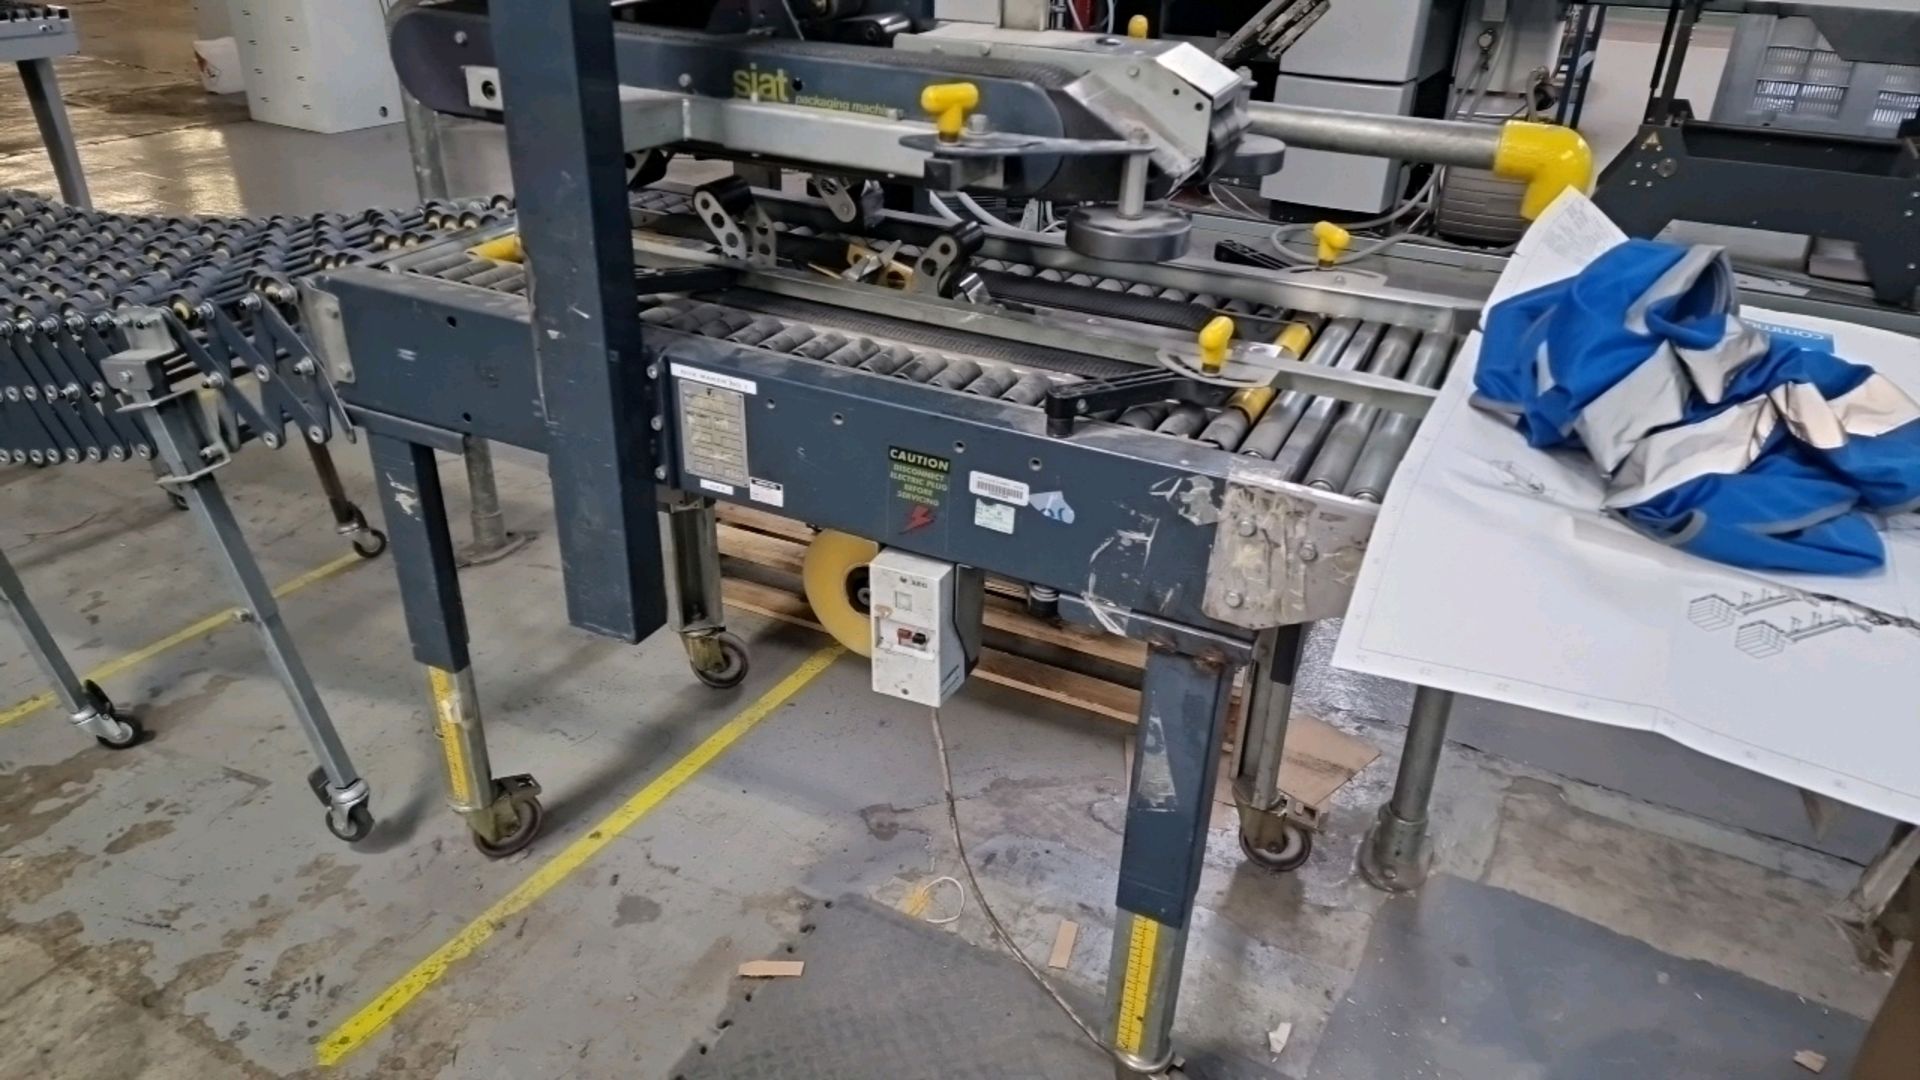 1994 Siat Packaging Machine - Image 3 of 10